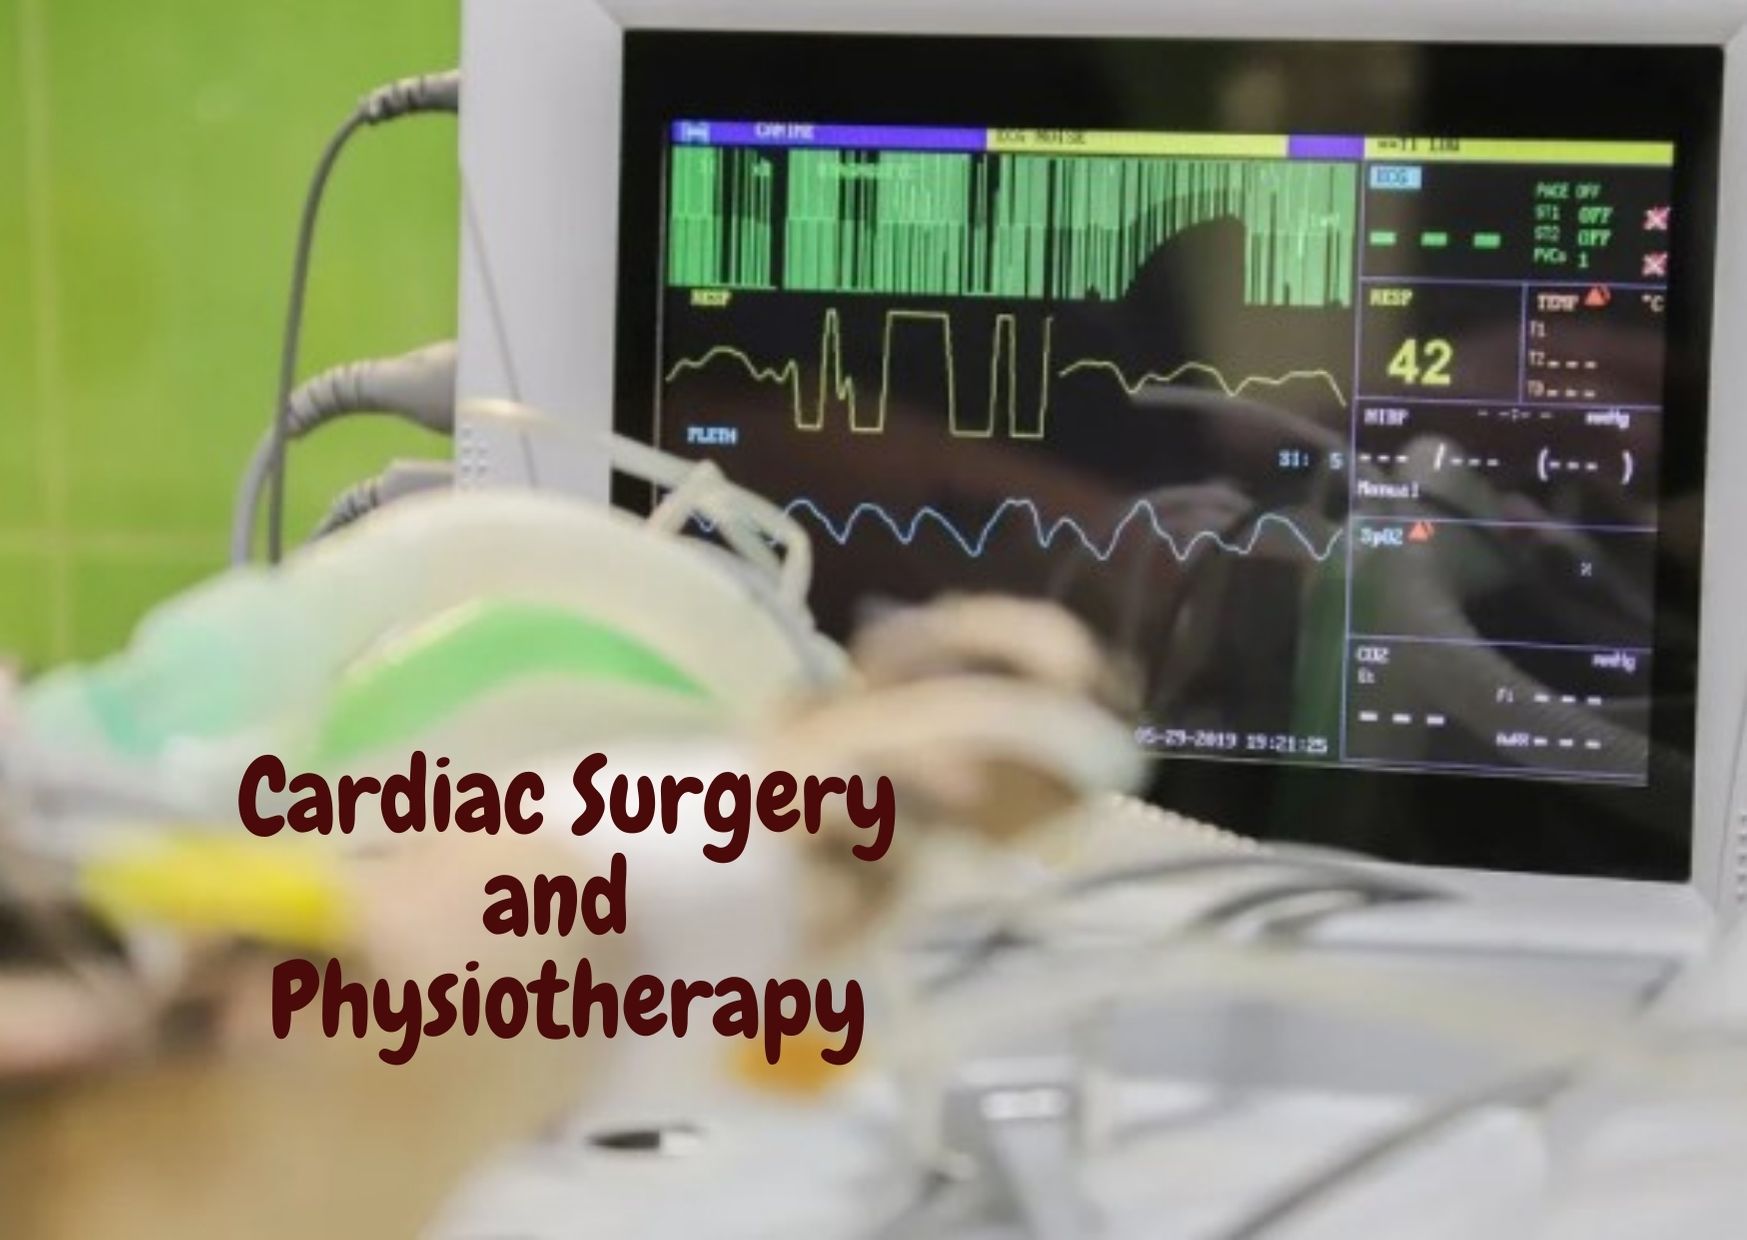 Rehabilitation after Cardiac Surgery using Physiotherapy